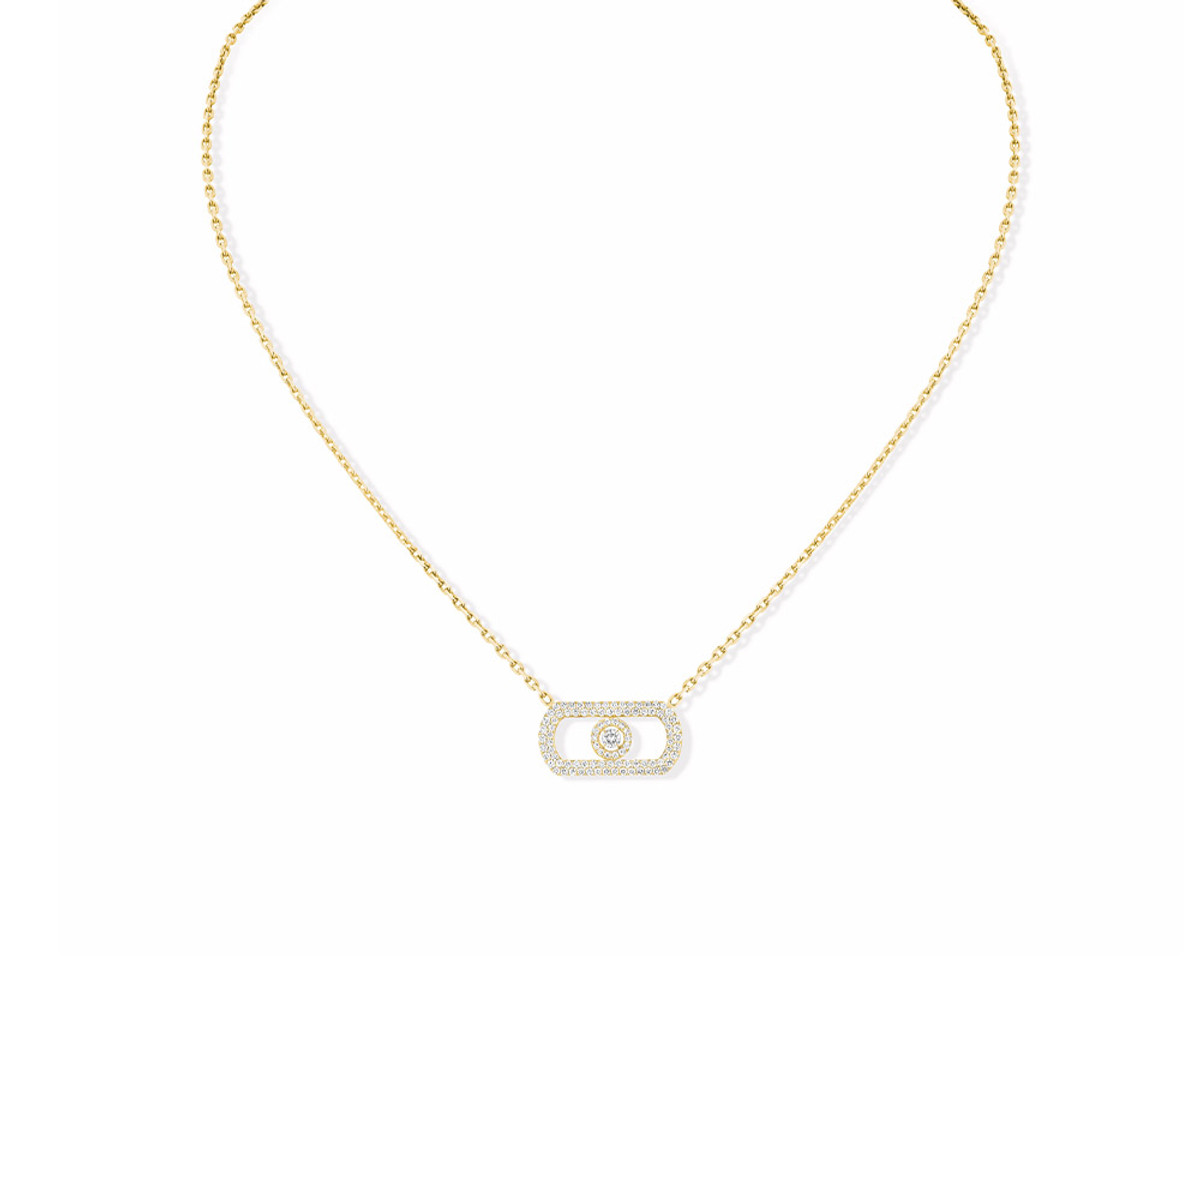 Messika 18K Yellow Gold Move Citizen Diamond Pave Necklace-56327 Product Image